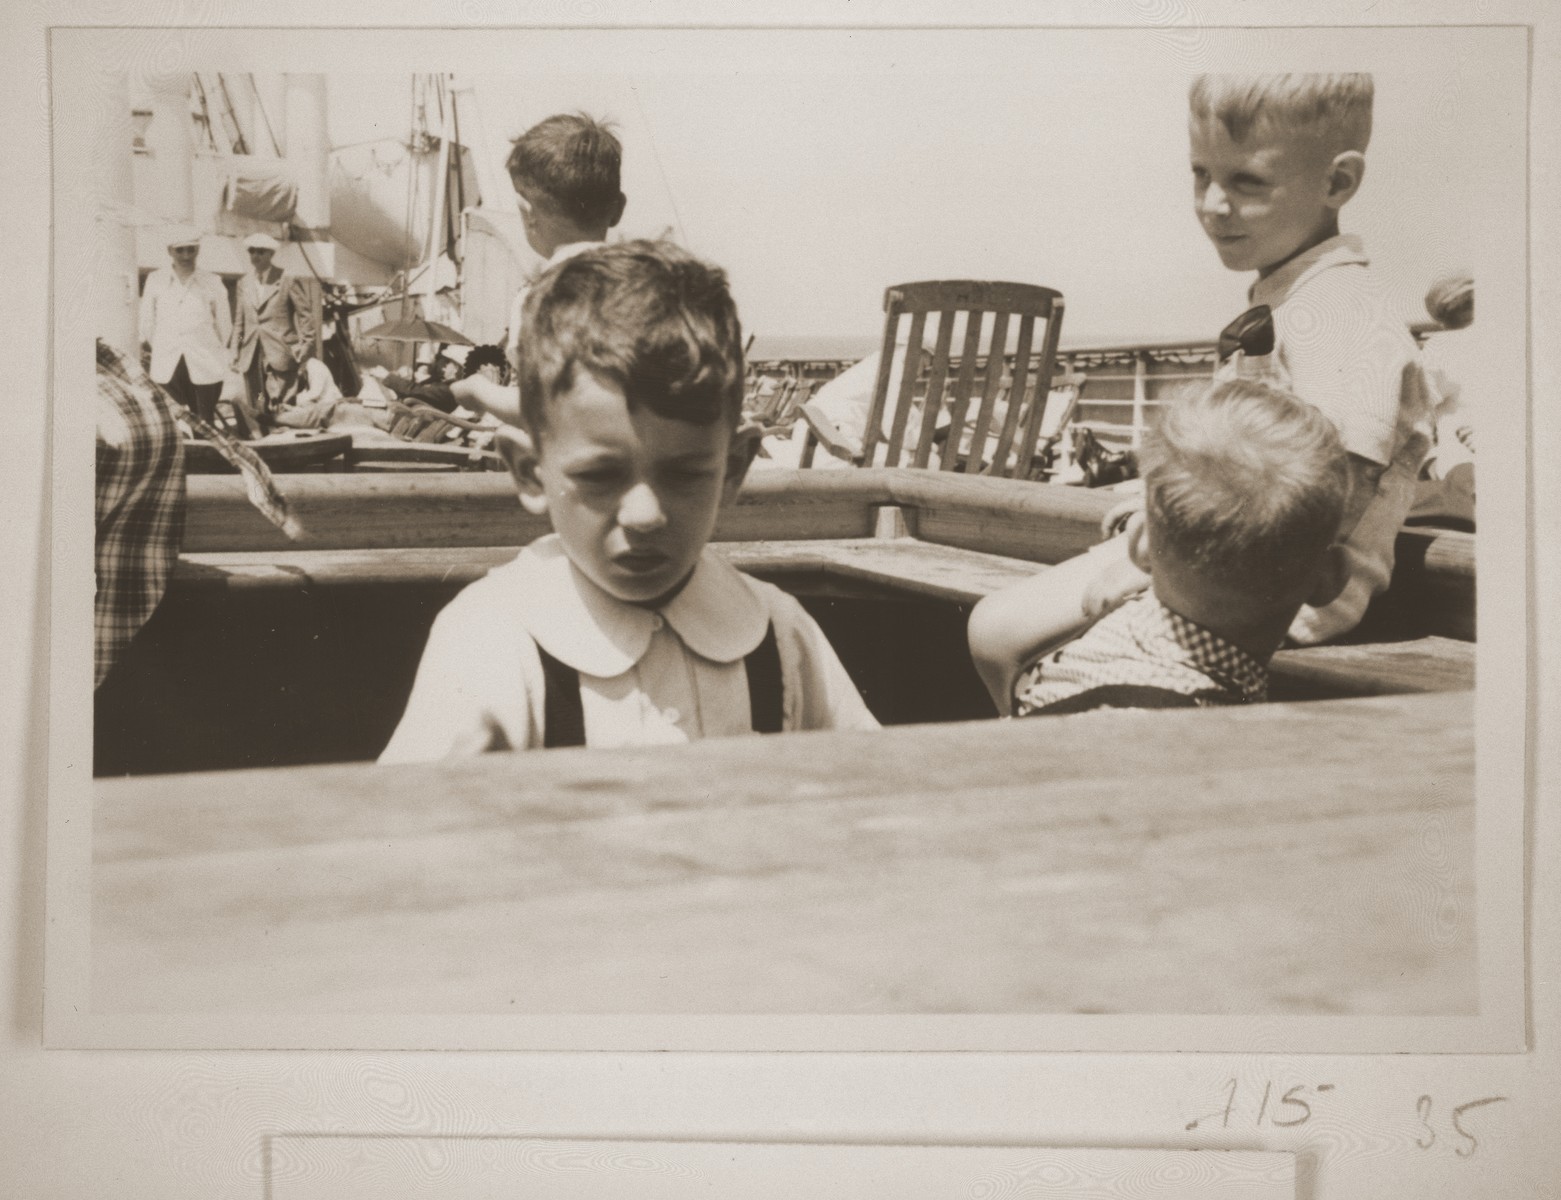 The Vendig children play on an outer deck of the MS St. Louis.